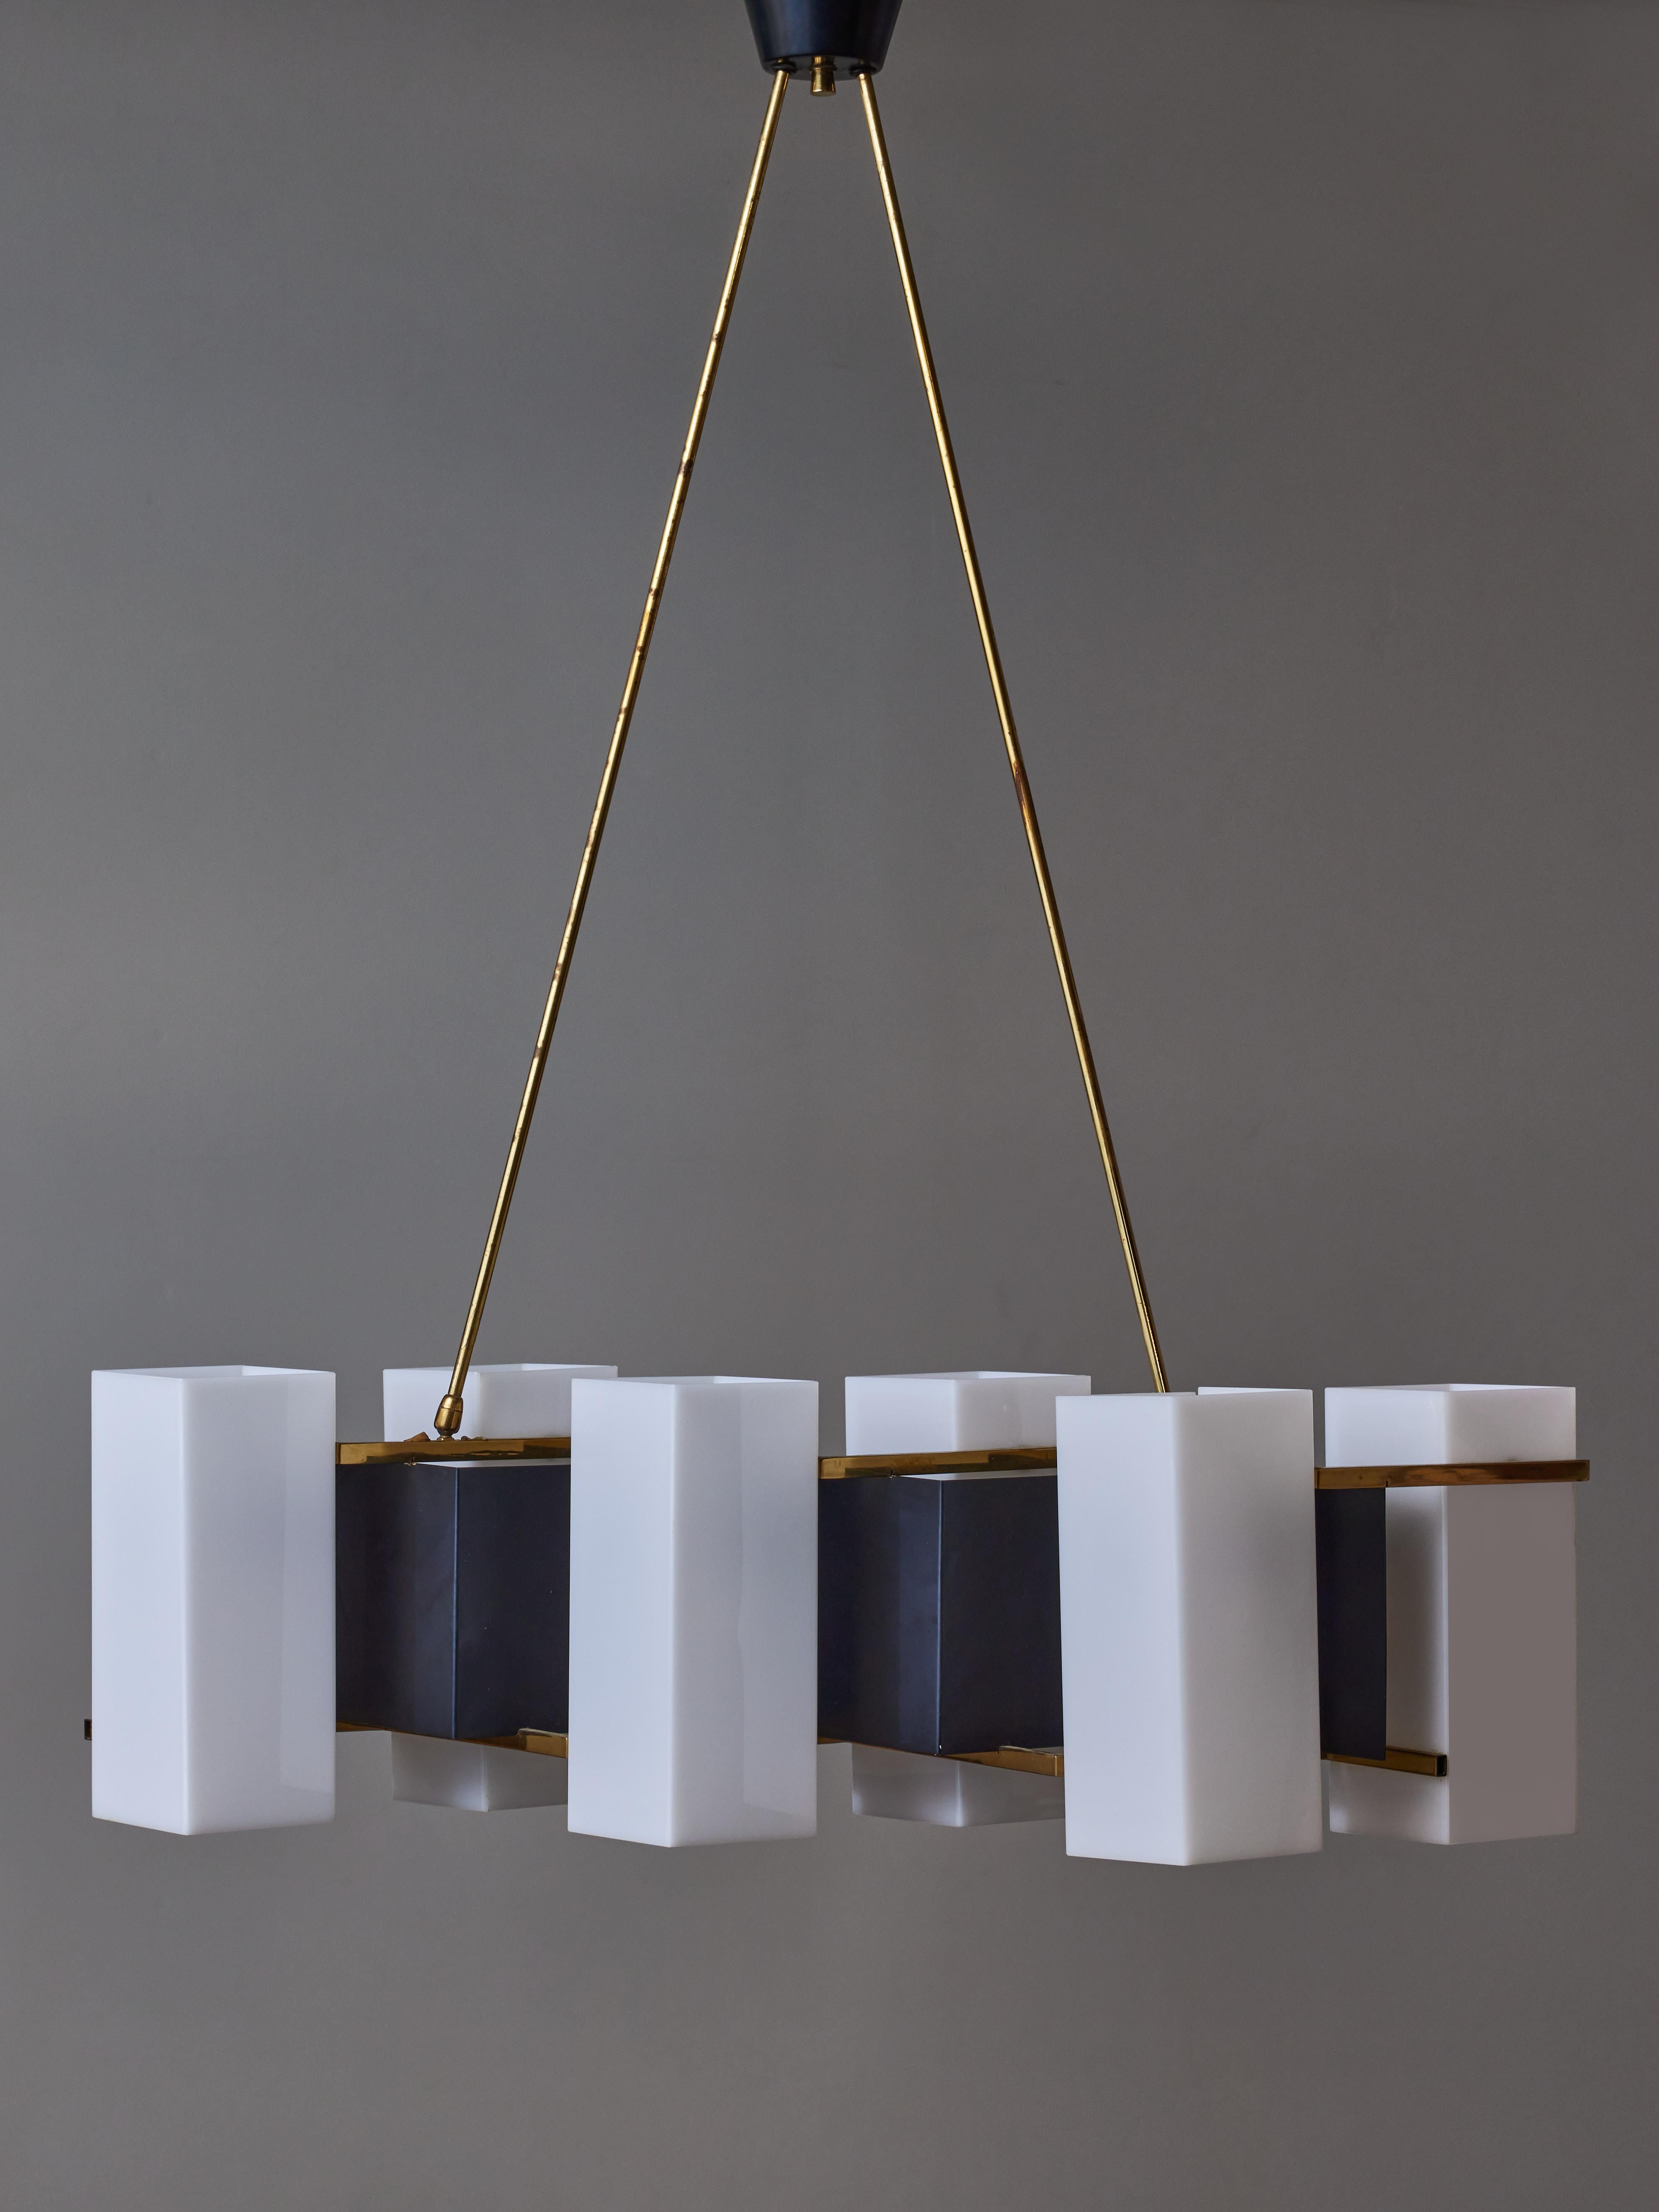 Mid-century chandelier by the Italian brand Stilux, this chandelier is made of six plexi rectangular sconces jointed together by a bent sheet of painted metal and brass structure.